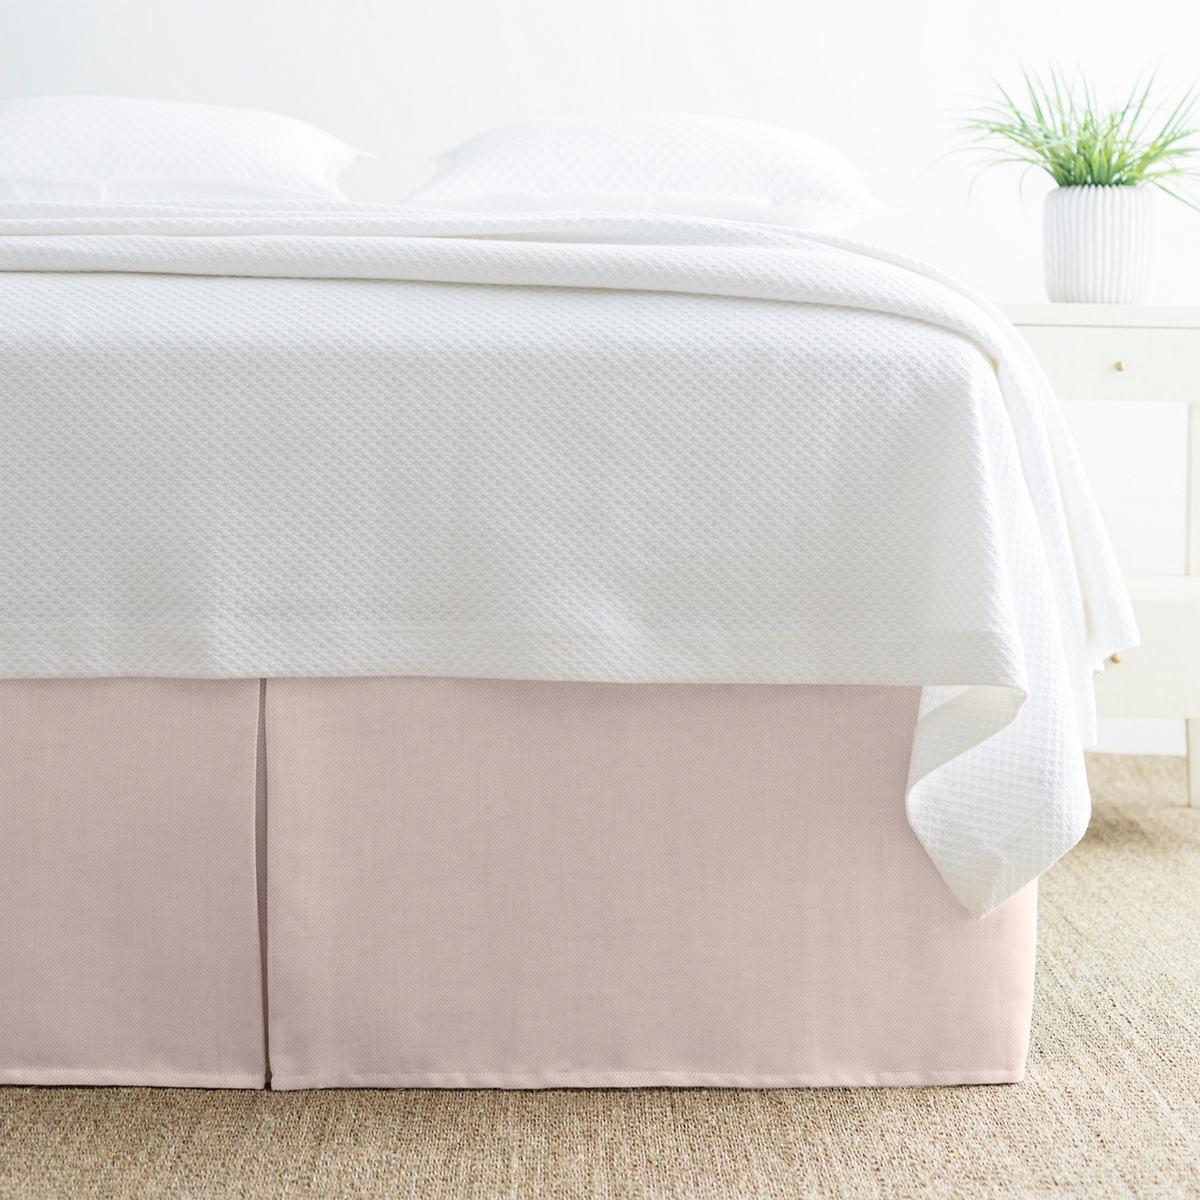 Brussels Slipper Pink Bed Skirt The, Pink Queen Size Bed Skirt